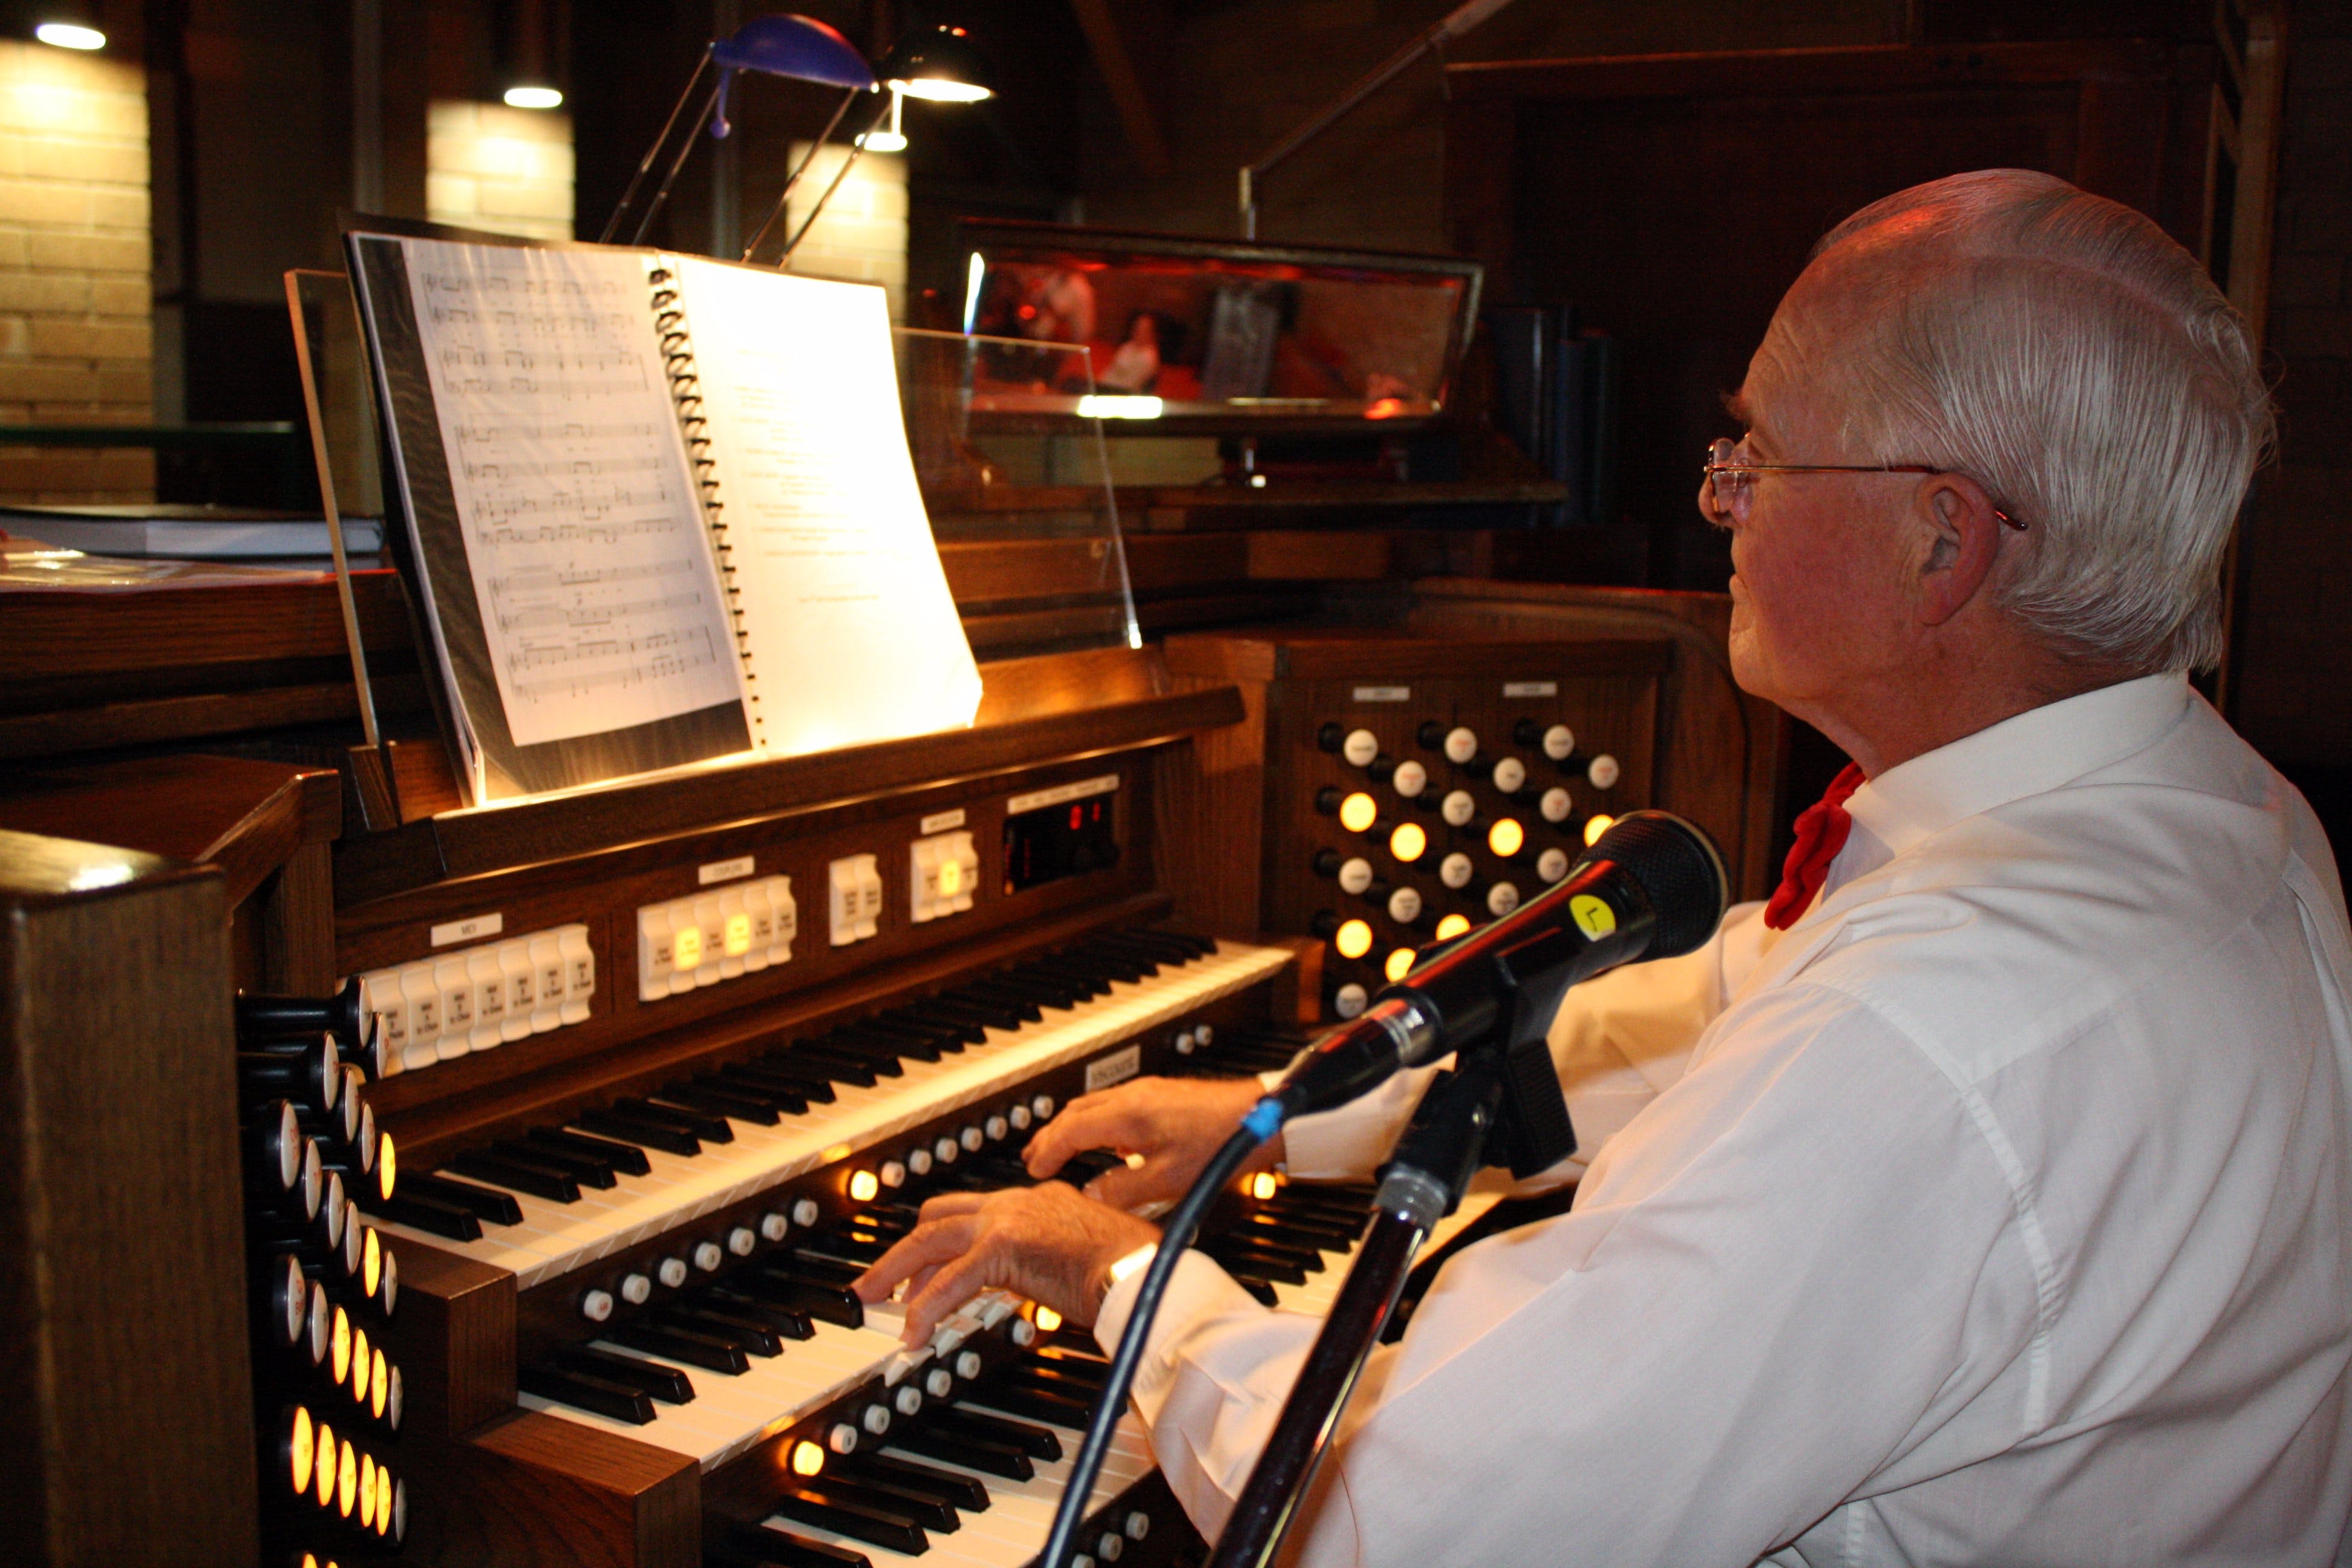 St Bartholomews Largest Digital Pipe Organ in the Southern Hemisphere - Attractions Sydney